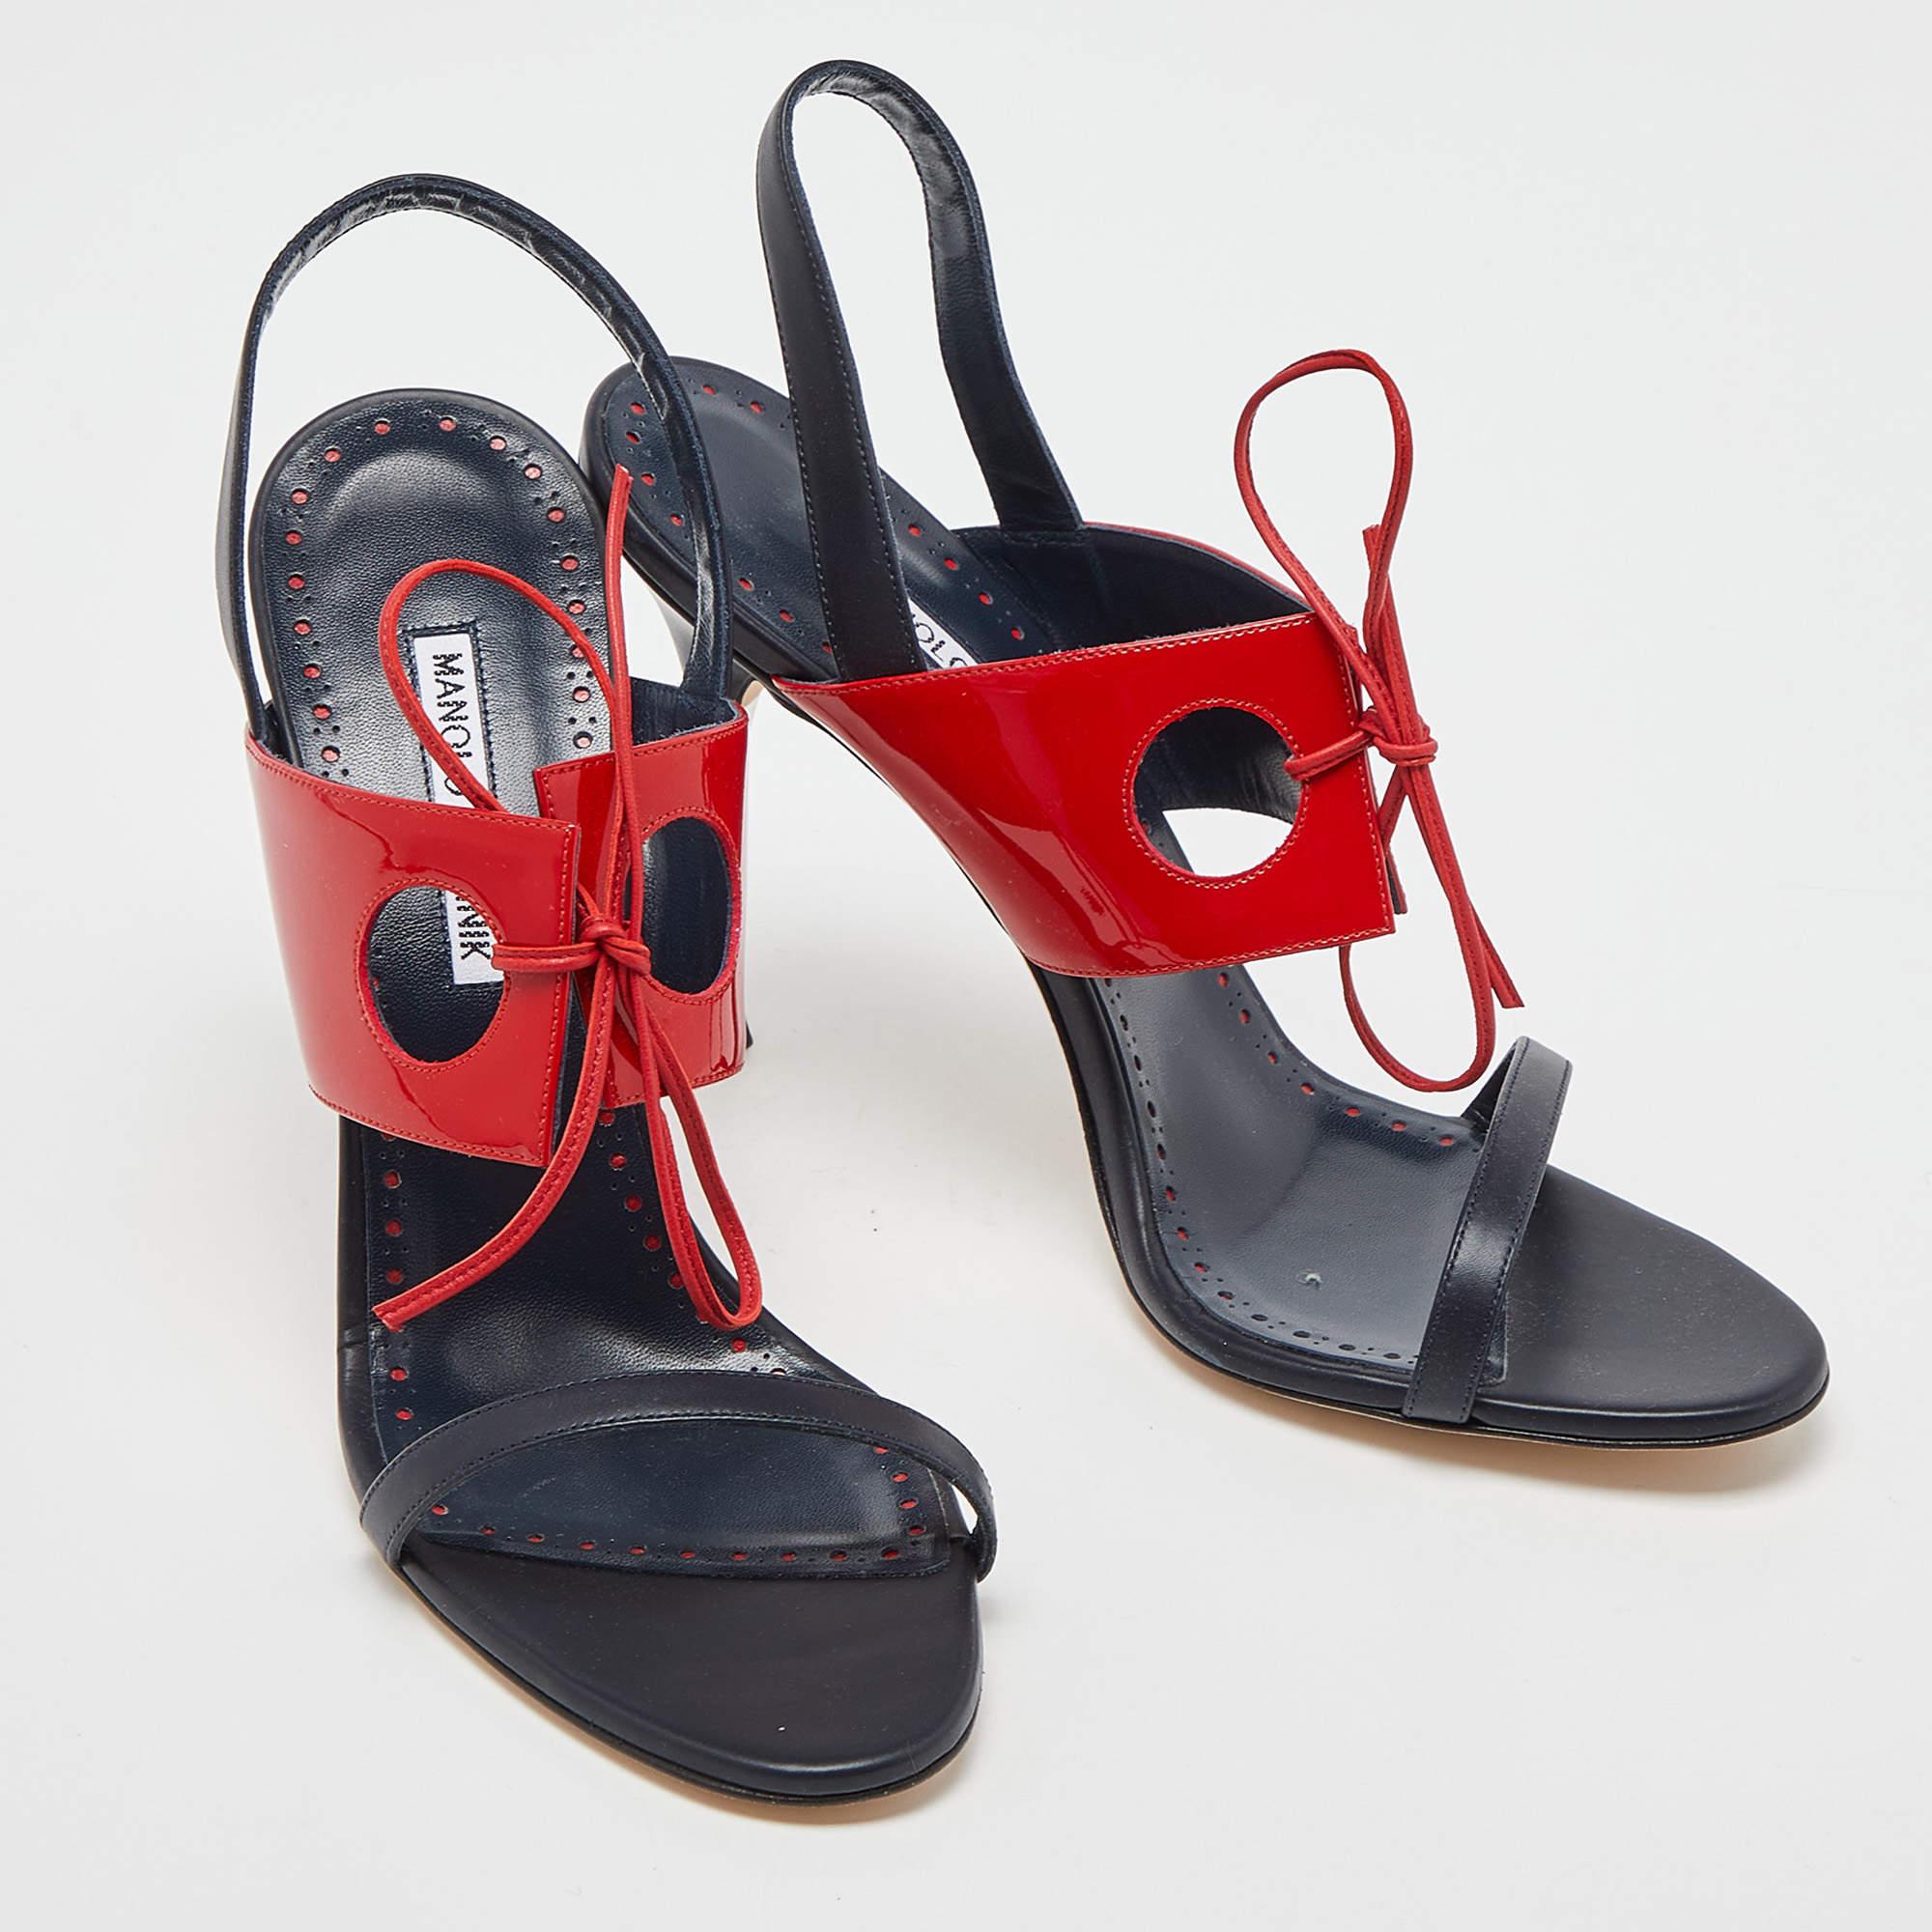 Manolo Blahnik Blue/Red Leather and Patent Ankle Strap Sandals In New Condition For Sale In Dubai, Al Qouz 2